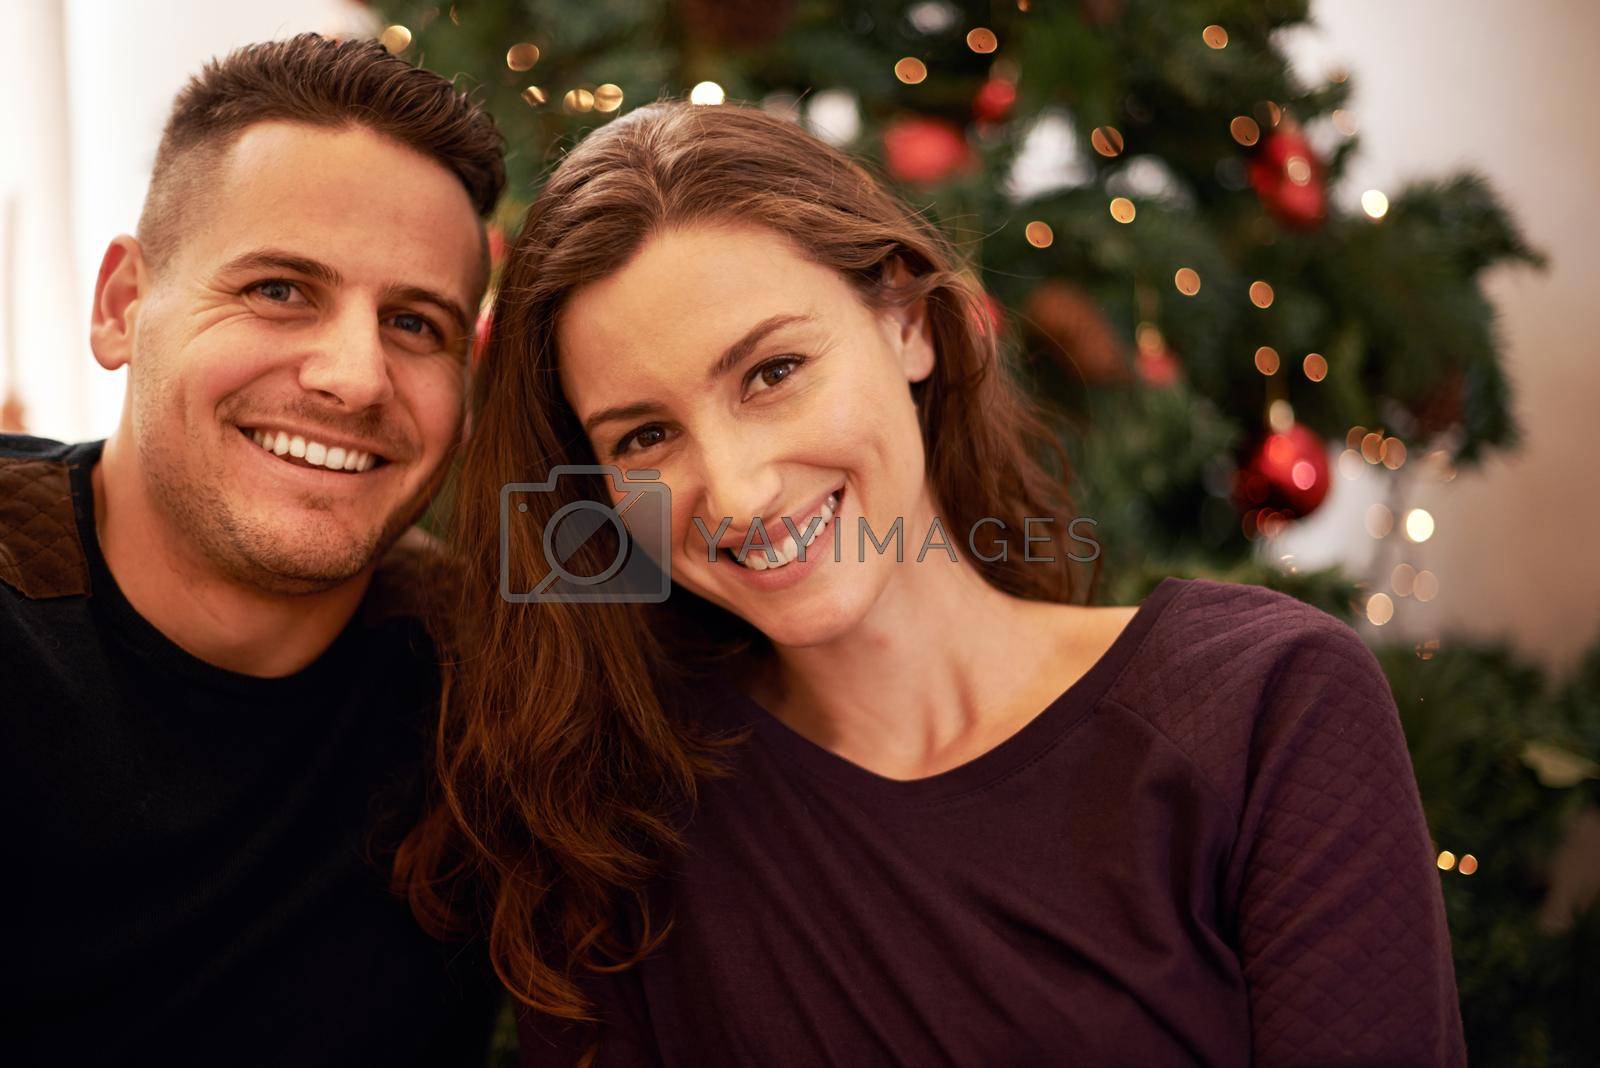 Royalty free image of Our first Christmas together. Portrait of a happy young couple on Christmas day. by YuriArcurs